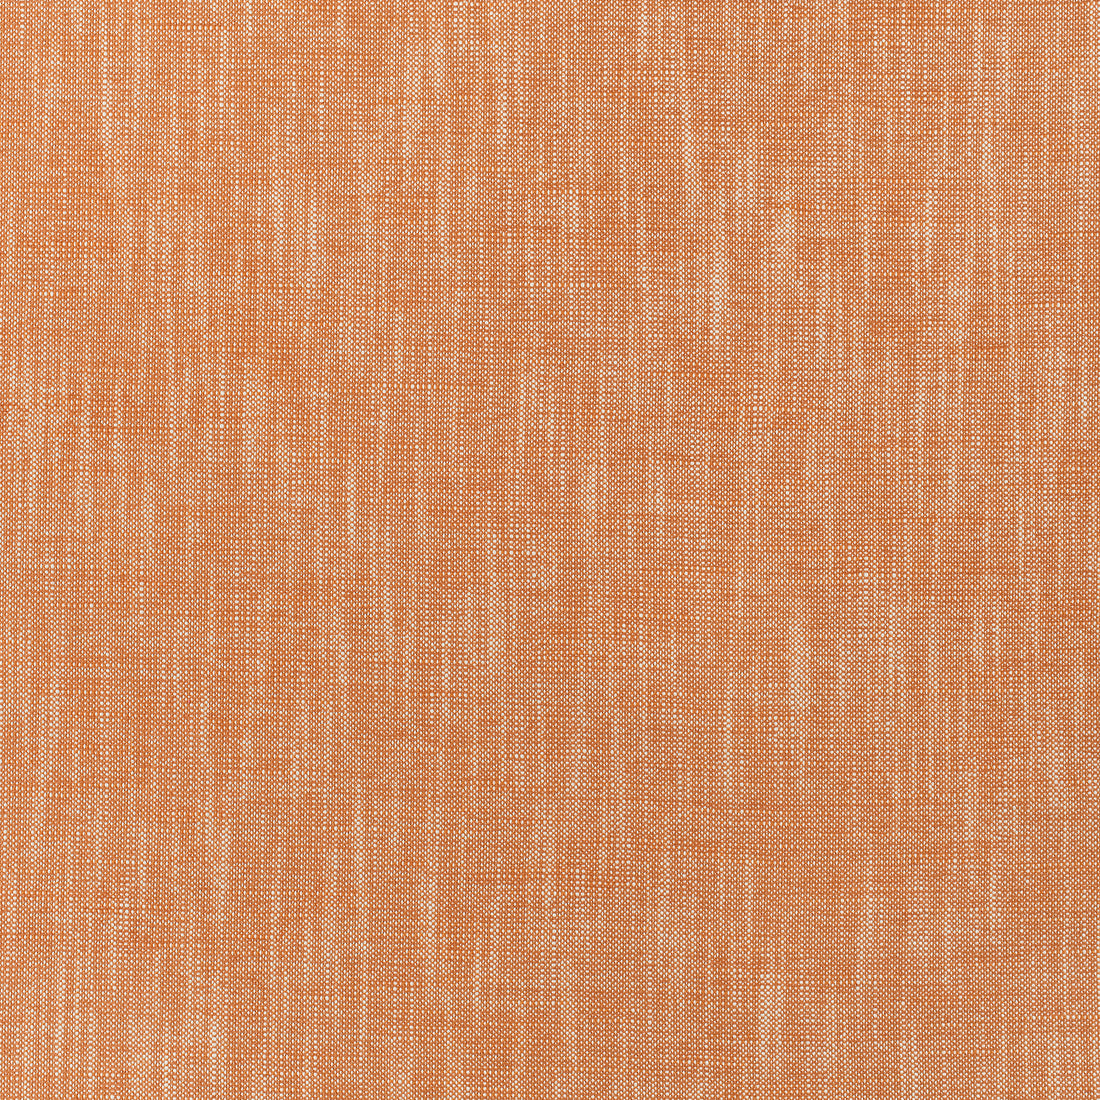 Bailey fabric in coral color - pattern number W80501 - by Thibaut in the Mosaic collection